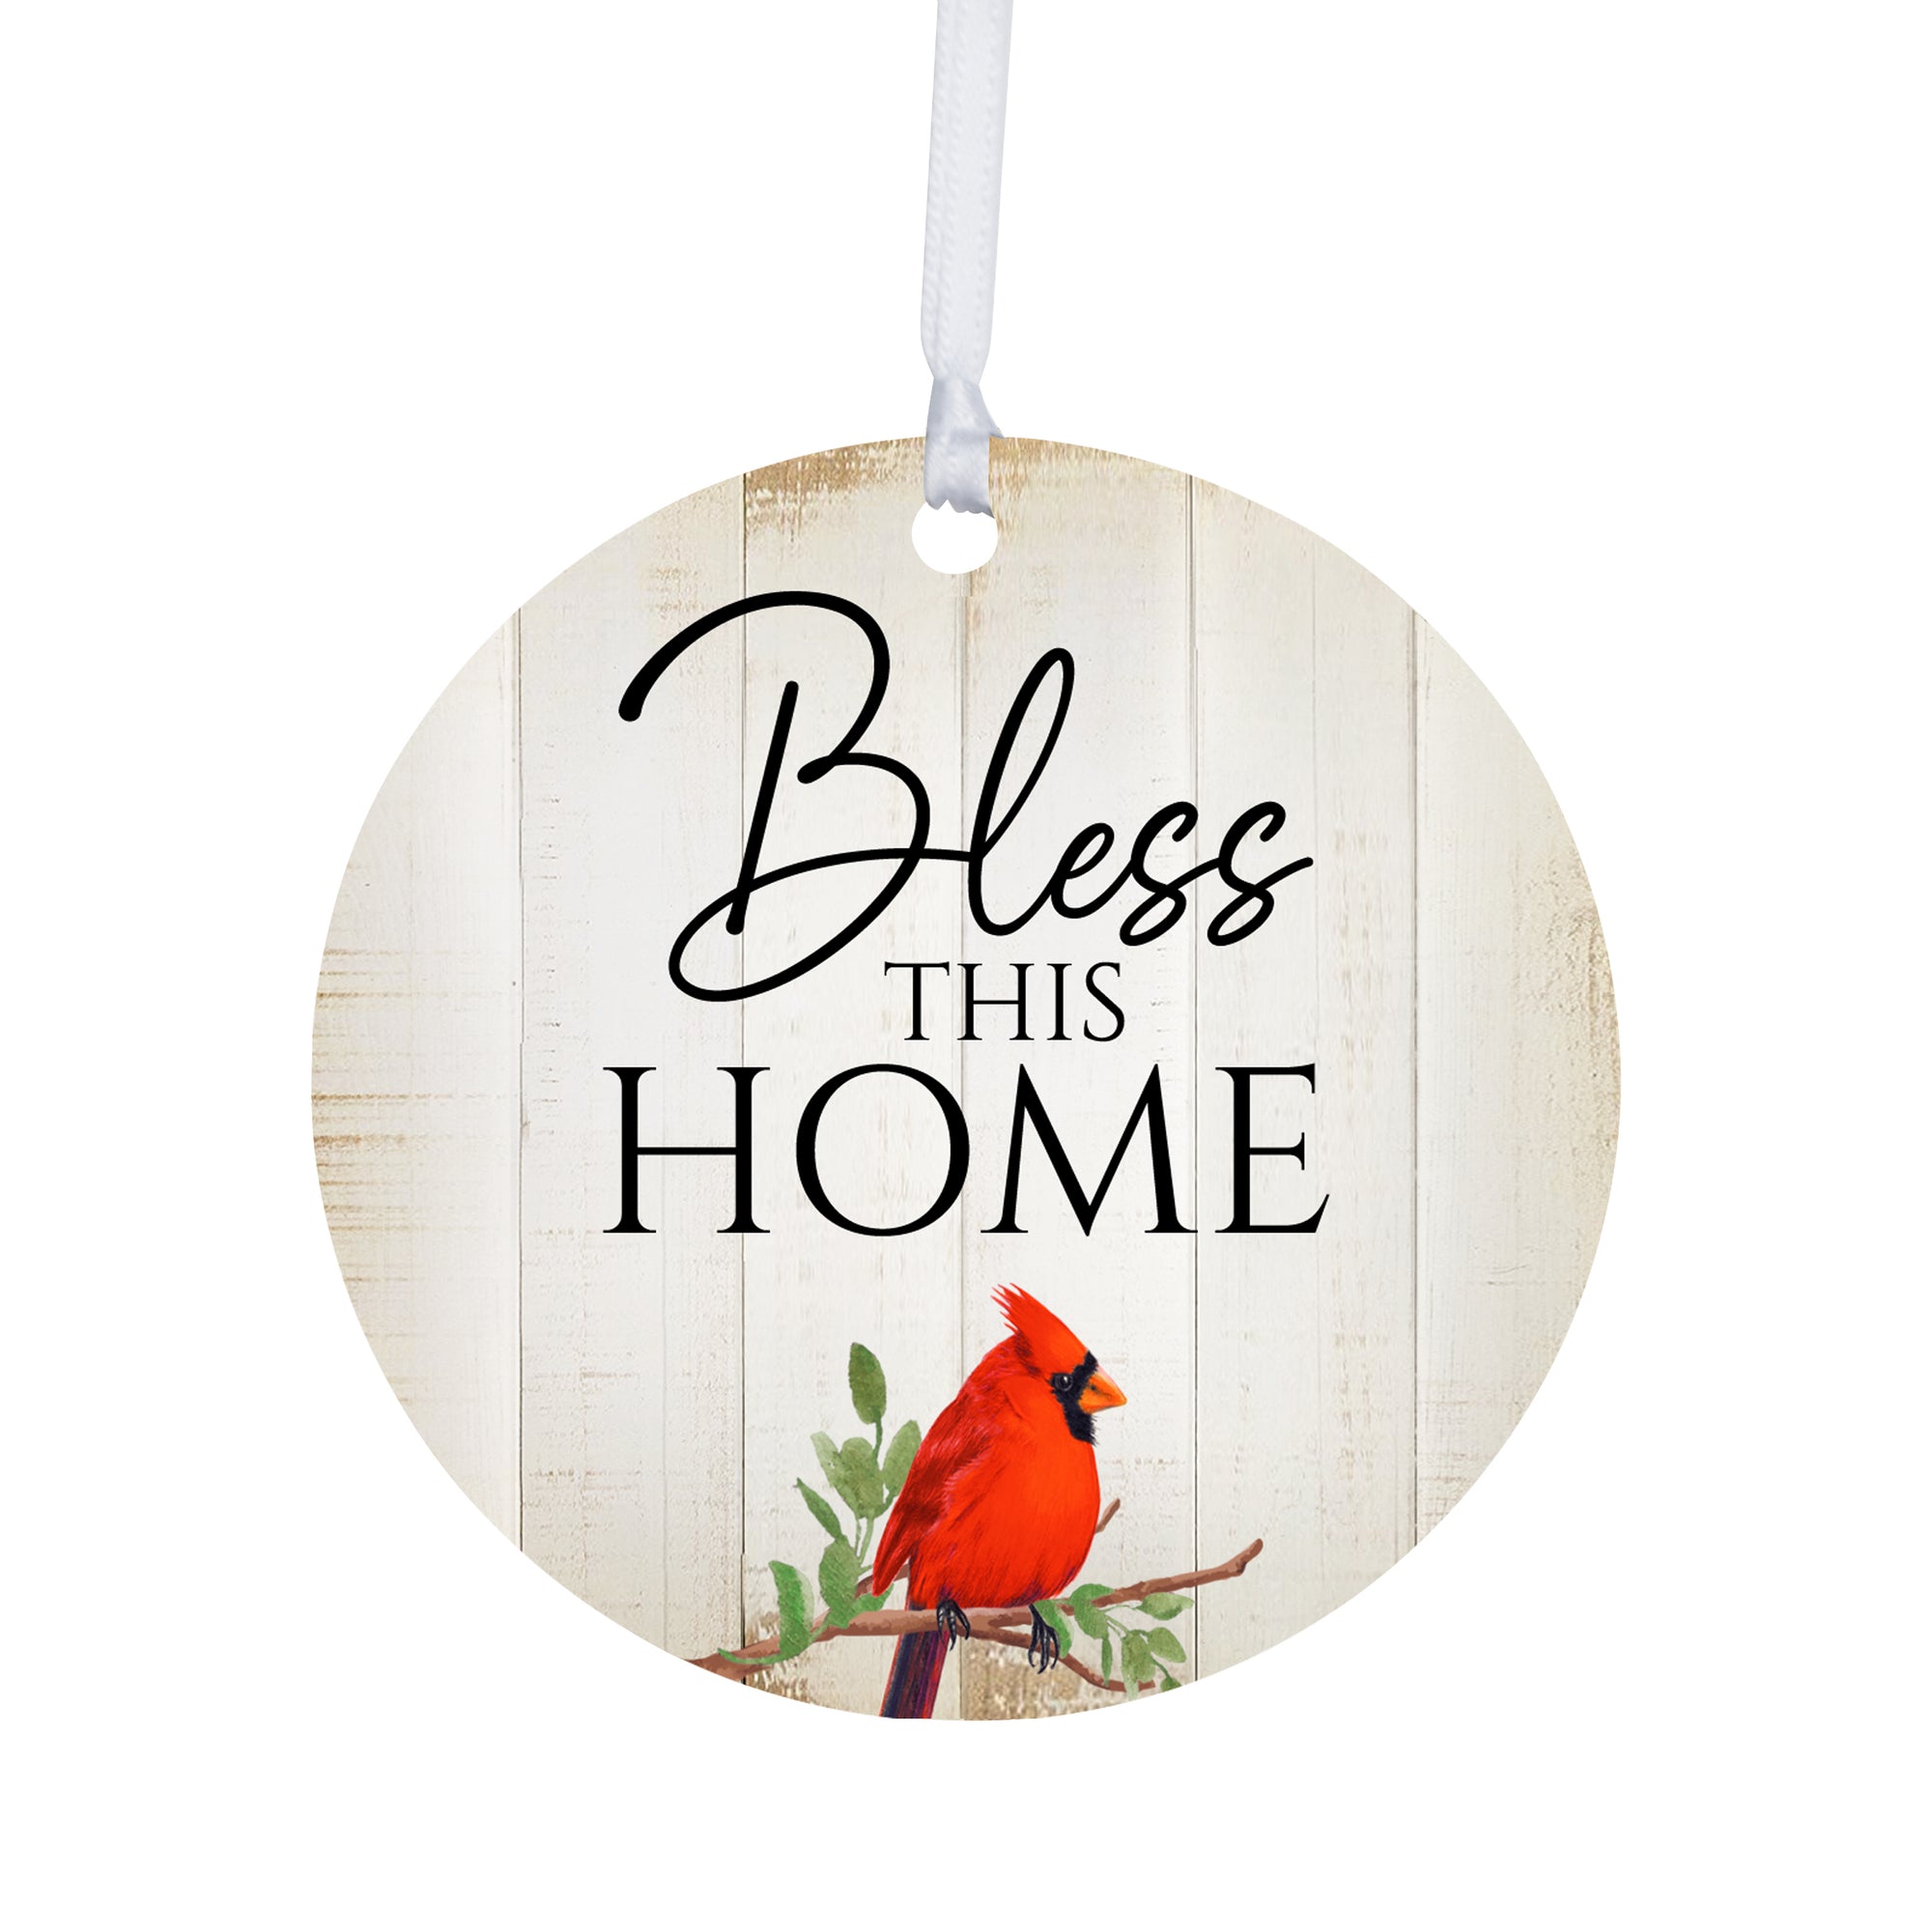 Vintage-Inspired Cardinal Ornament With Everyday Verses Gift Ideas - Bless This Home